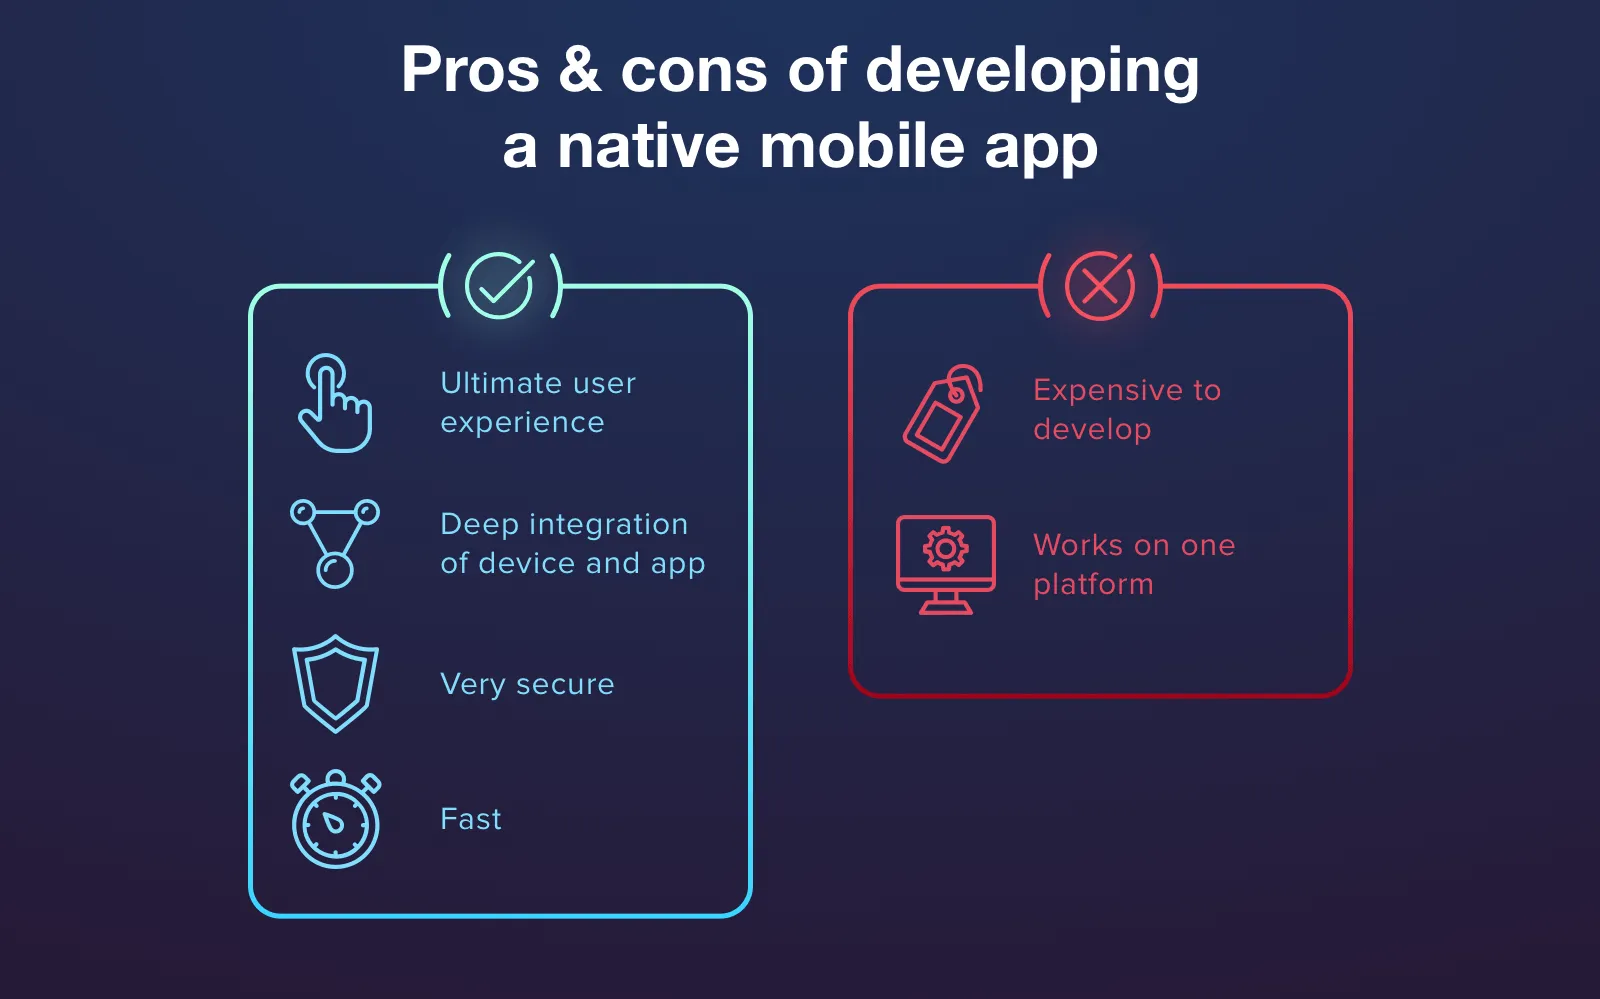 Advantages and disadvantages of native app development approach and mobile app stack for it